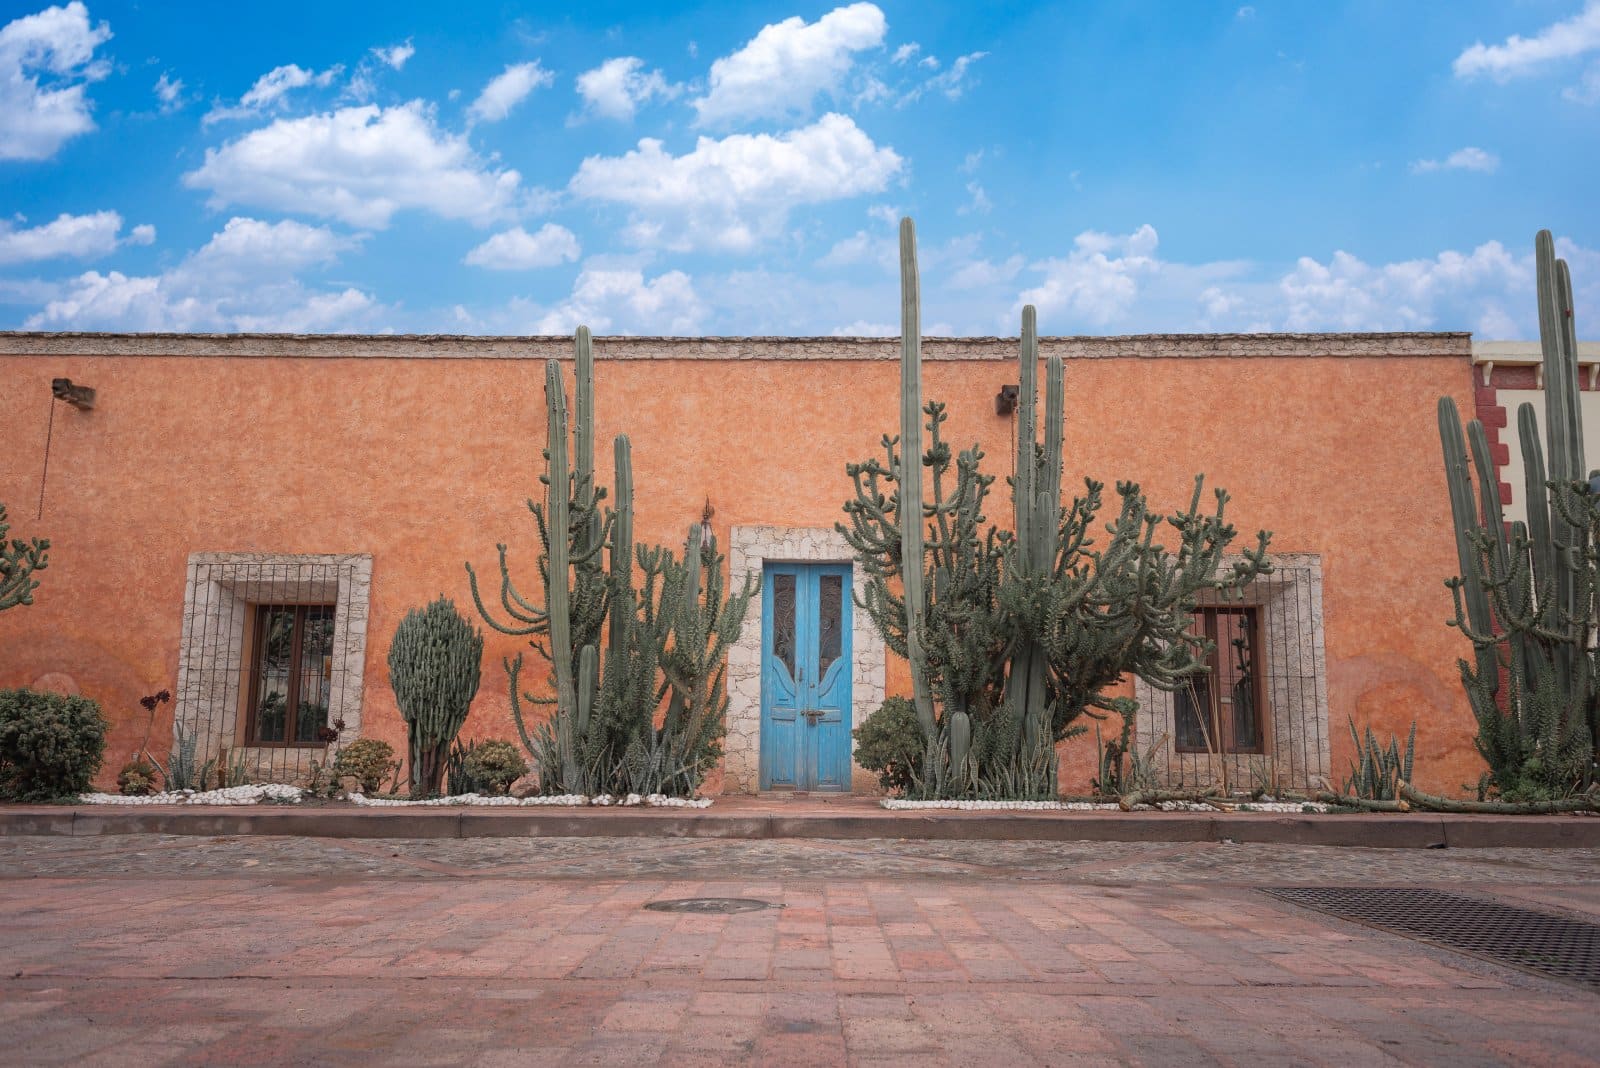 <p class="wp-caption-text">Image Credit: Shutterstock / christophertp92</p>  <p><span>Mexico’s Pueblos Mágicos program highlights towns across the country known for their natural beauty, cultural riches, or historical relevance. These “Magic Towns” offer a glimpse into Mexico’s diverse landscapes and traditions, from the colonial architecture of Valladolid in Yucatán to the indigenous culture of San Cristóbal de las Casas in Chiapas. Exploring these towns provides an opportunity to experience the country’s heart and soul beyond the typical tourist paths.</span></p>